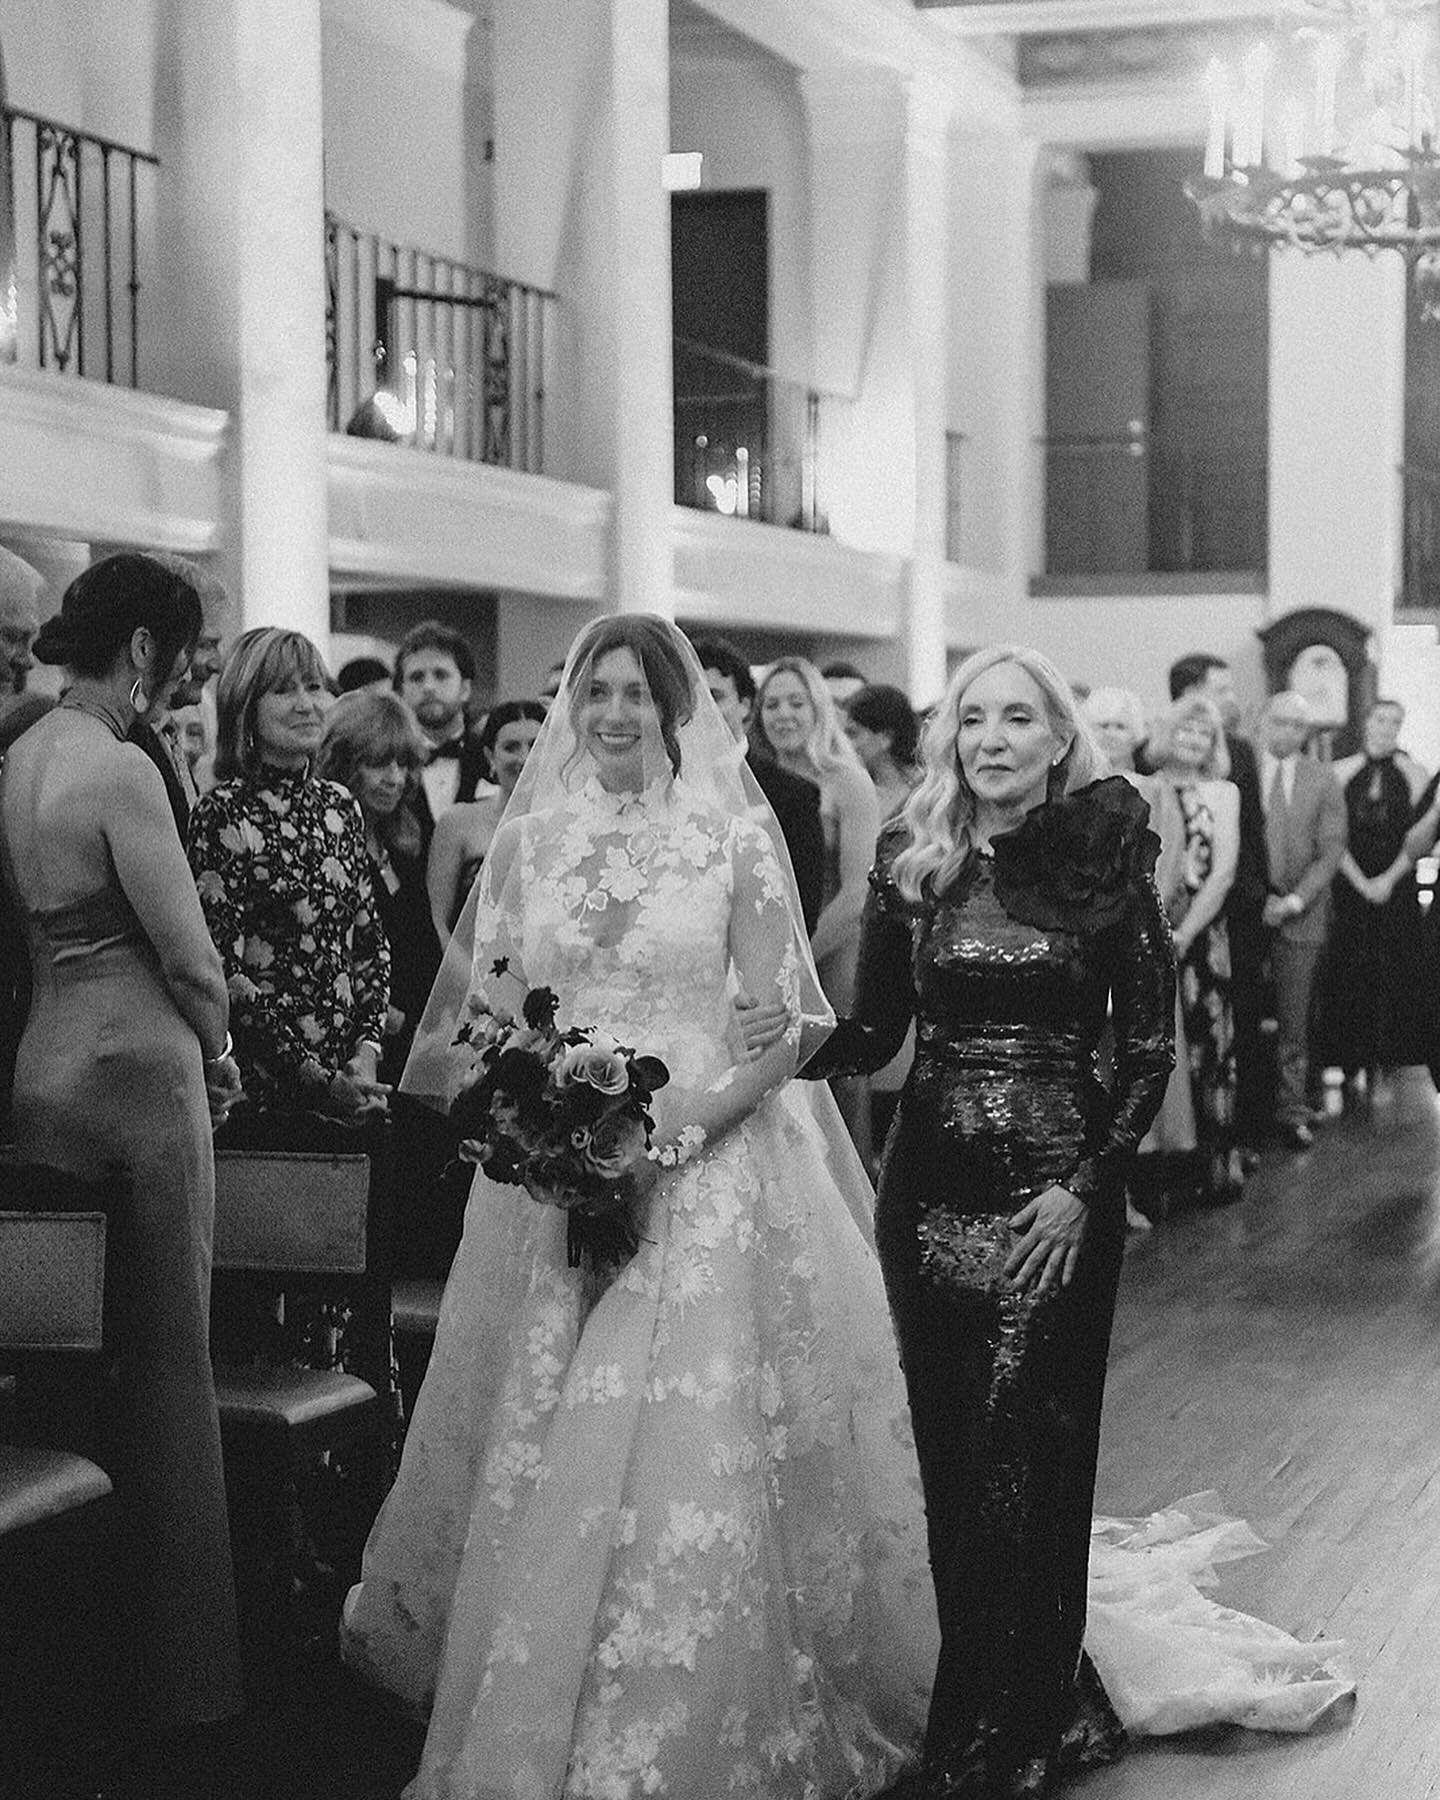 Can&rsquo;t nothing beat my mother&rsquo;s love🤍
How special is this mother&rsquo;s moment, walking her daughter down the aisle. Followed by images of the mother-daughter dance at the reception; both moments are a sweet and emotional gesture, filled